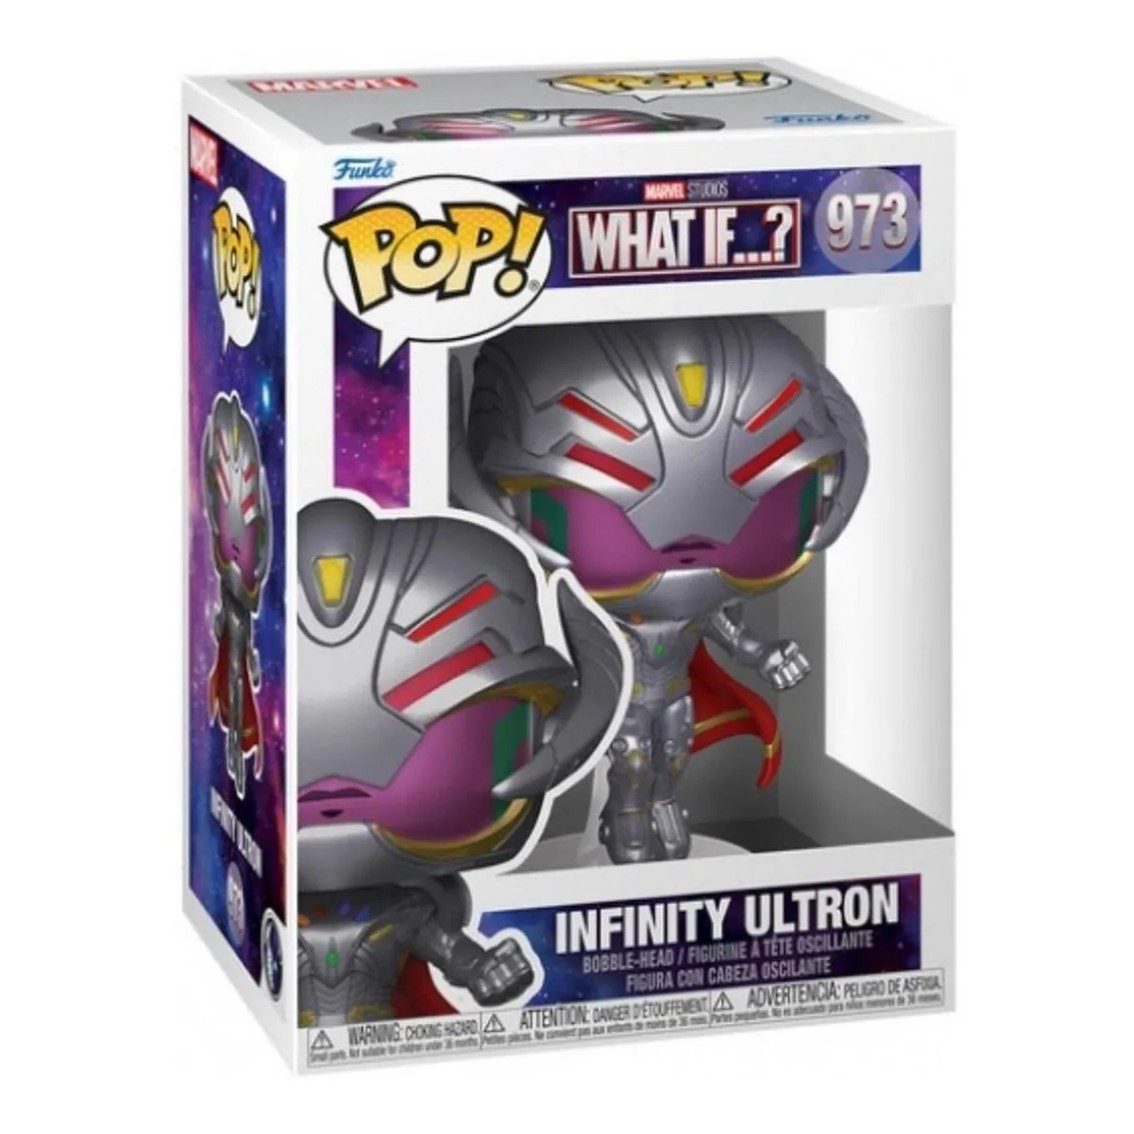 889698586481-PN-58648-Cod.-Articulo-MGS0000009959-Funko-pop-marvel-what-if-infinity-ultron-58648-1